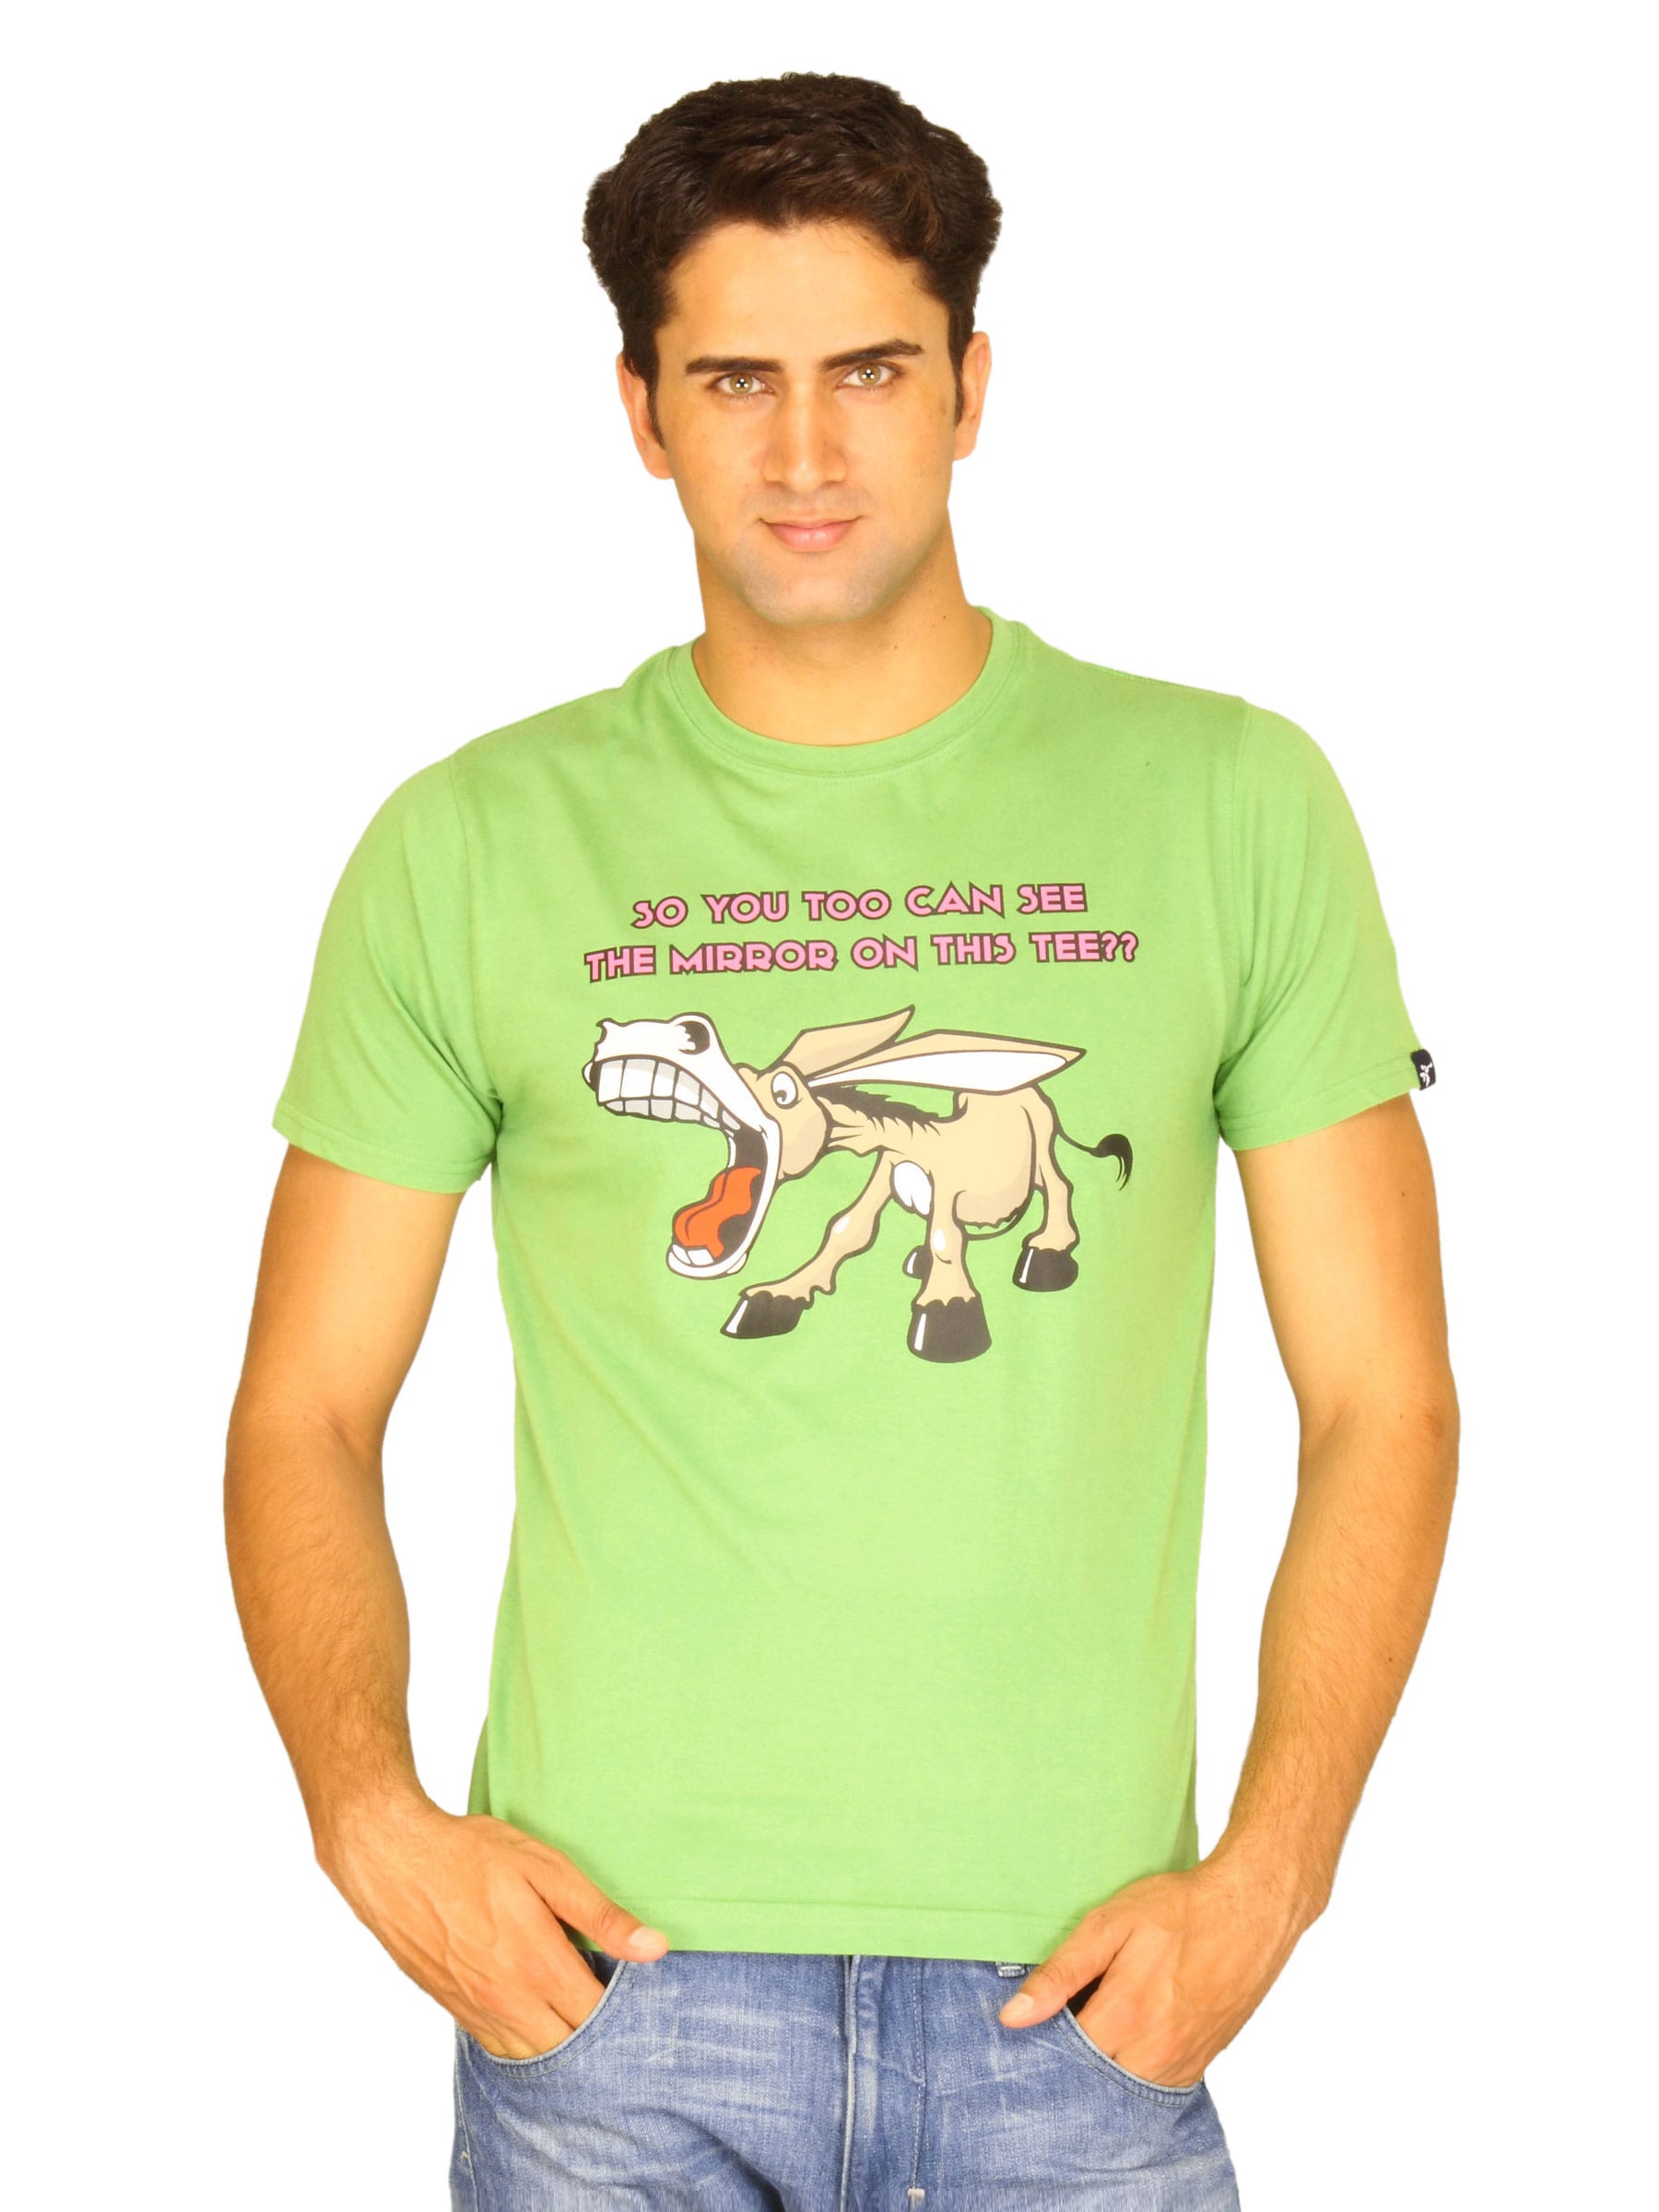 Probase Men's Mirror On The Green T-shirt